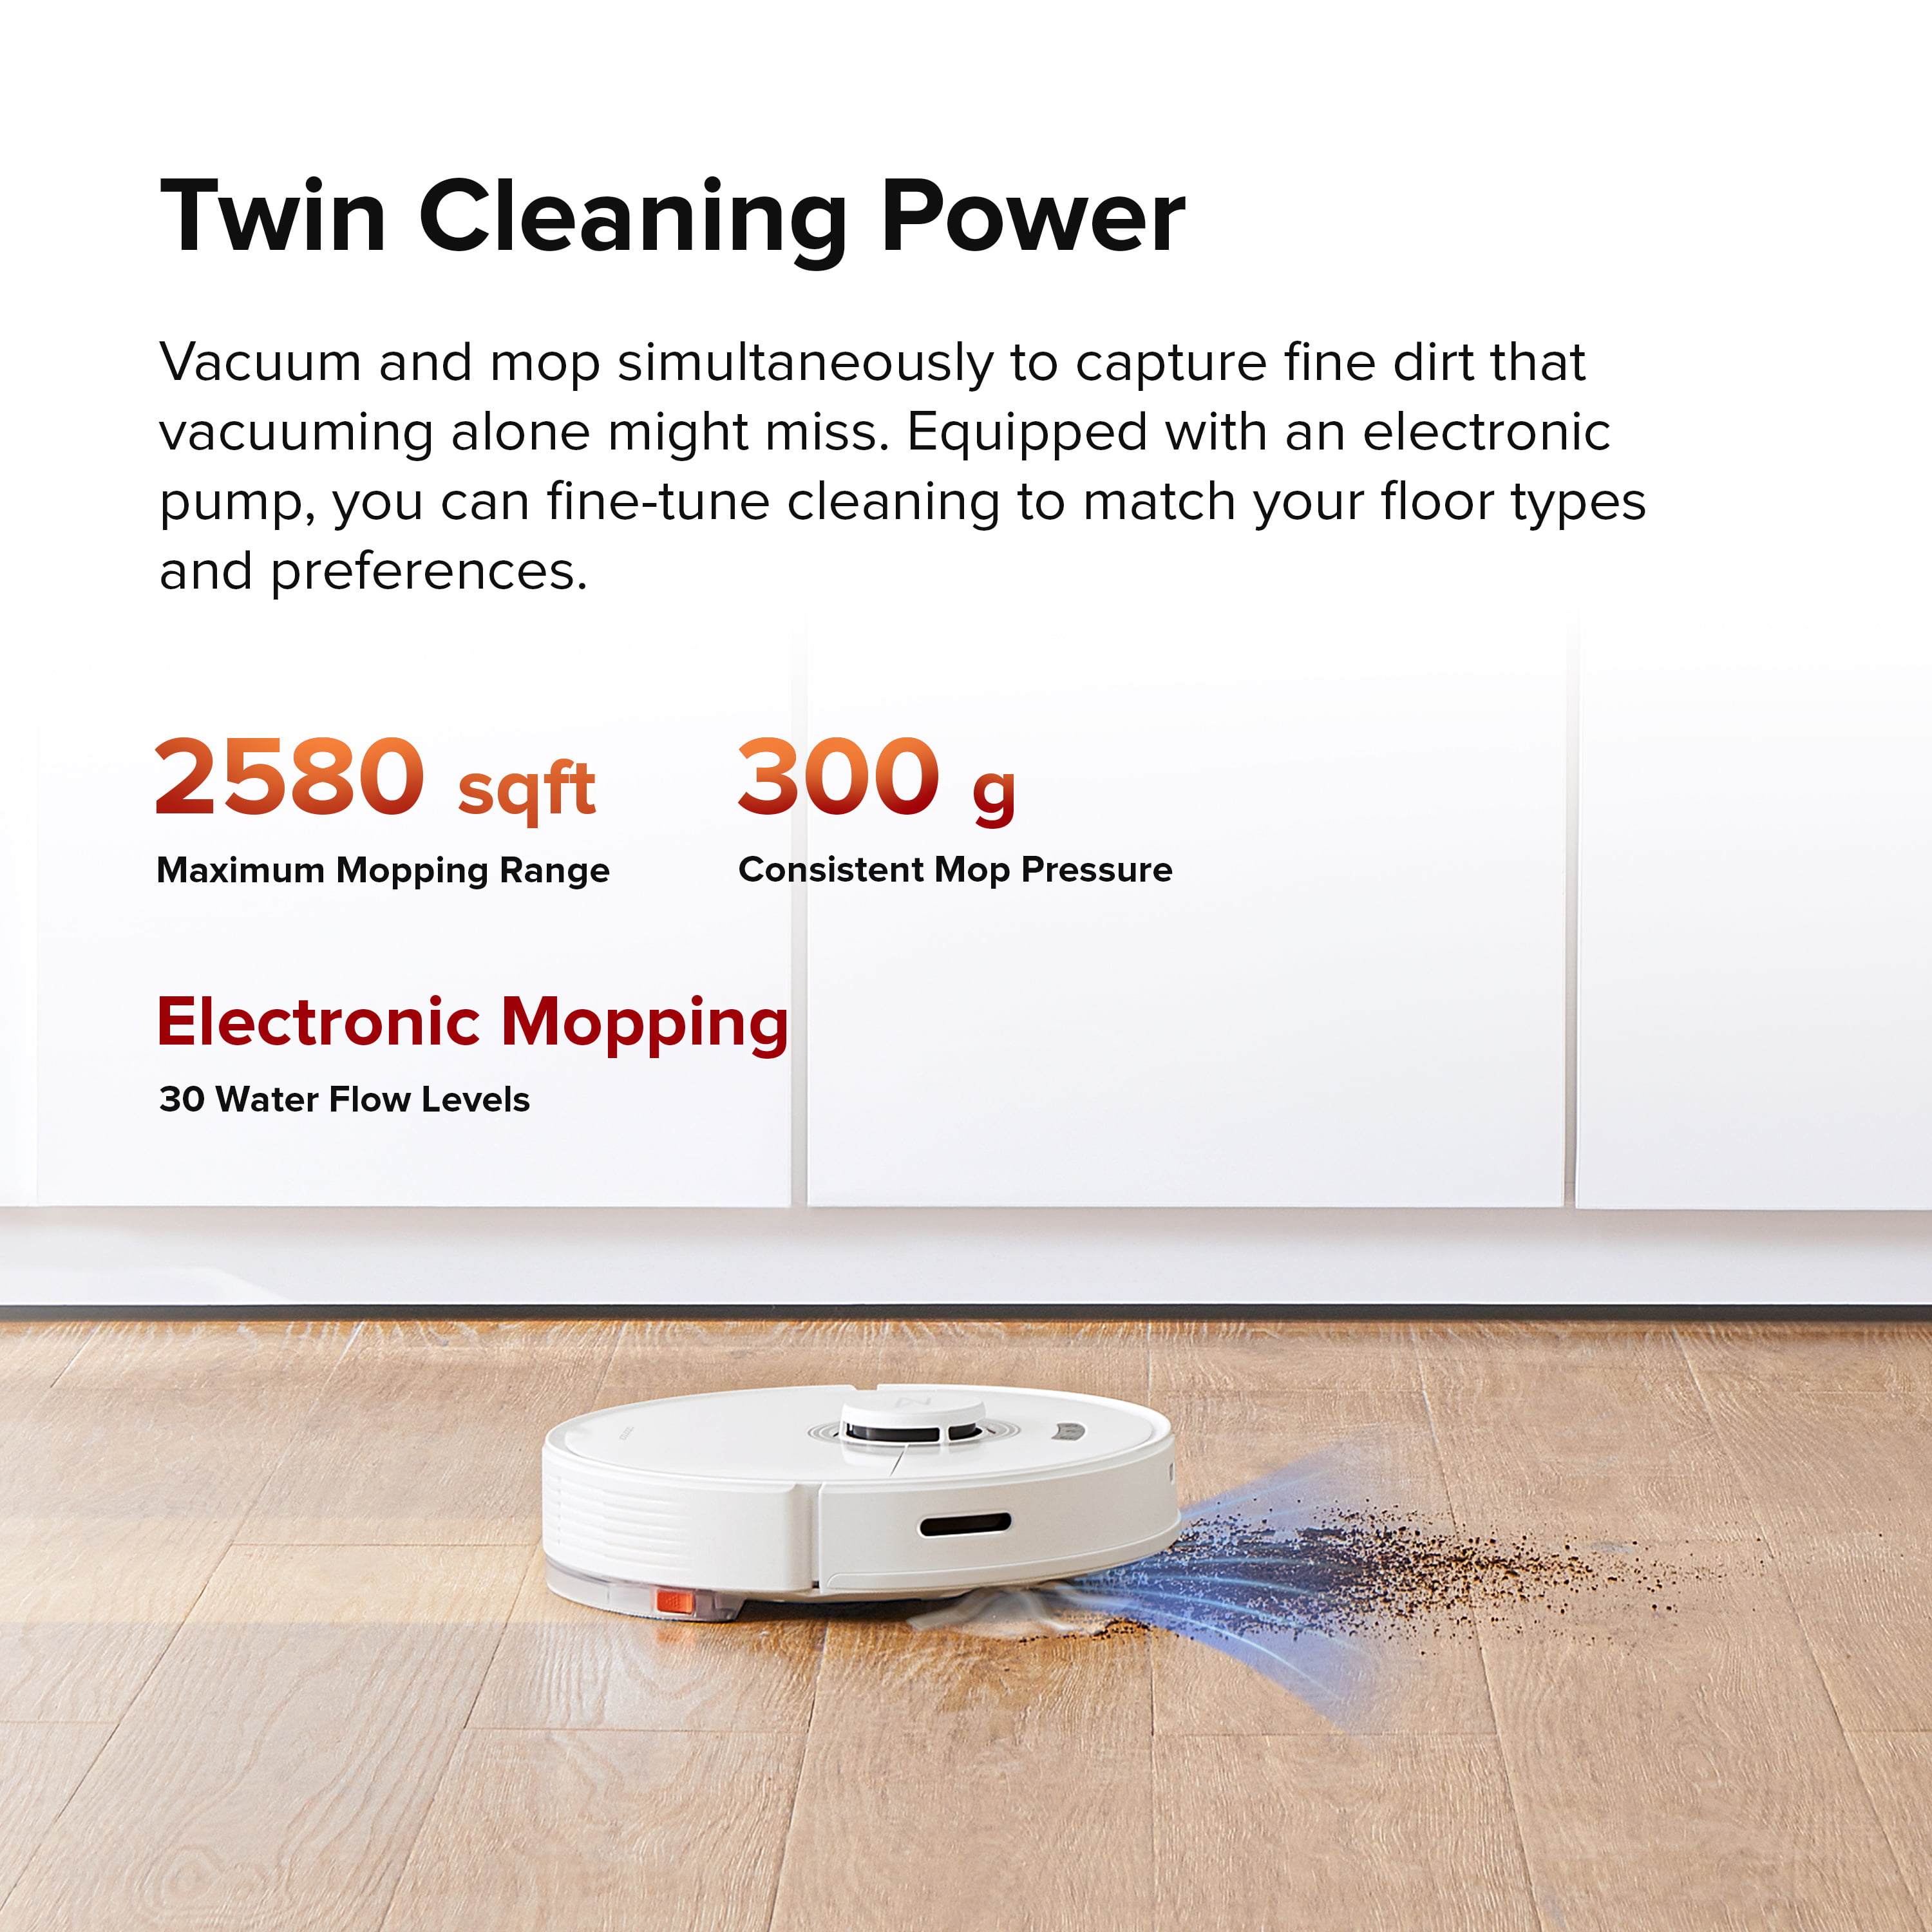 Roborock Q7 Max Robot Vacuum Cleaner with Mop, 4200Pa Strong Suction, Lidar  Navigation, Multi-Level Mapping, No-Go&No-Mop Zones, 180mins Runtime, Works  with Alexa, Perfect for Pet Hair